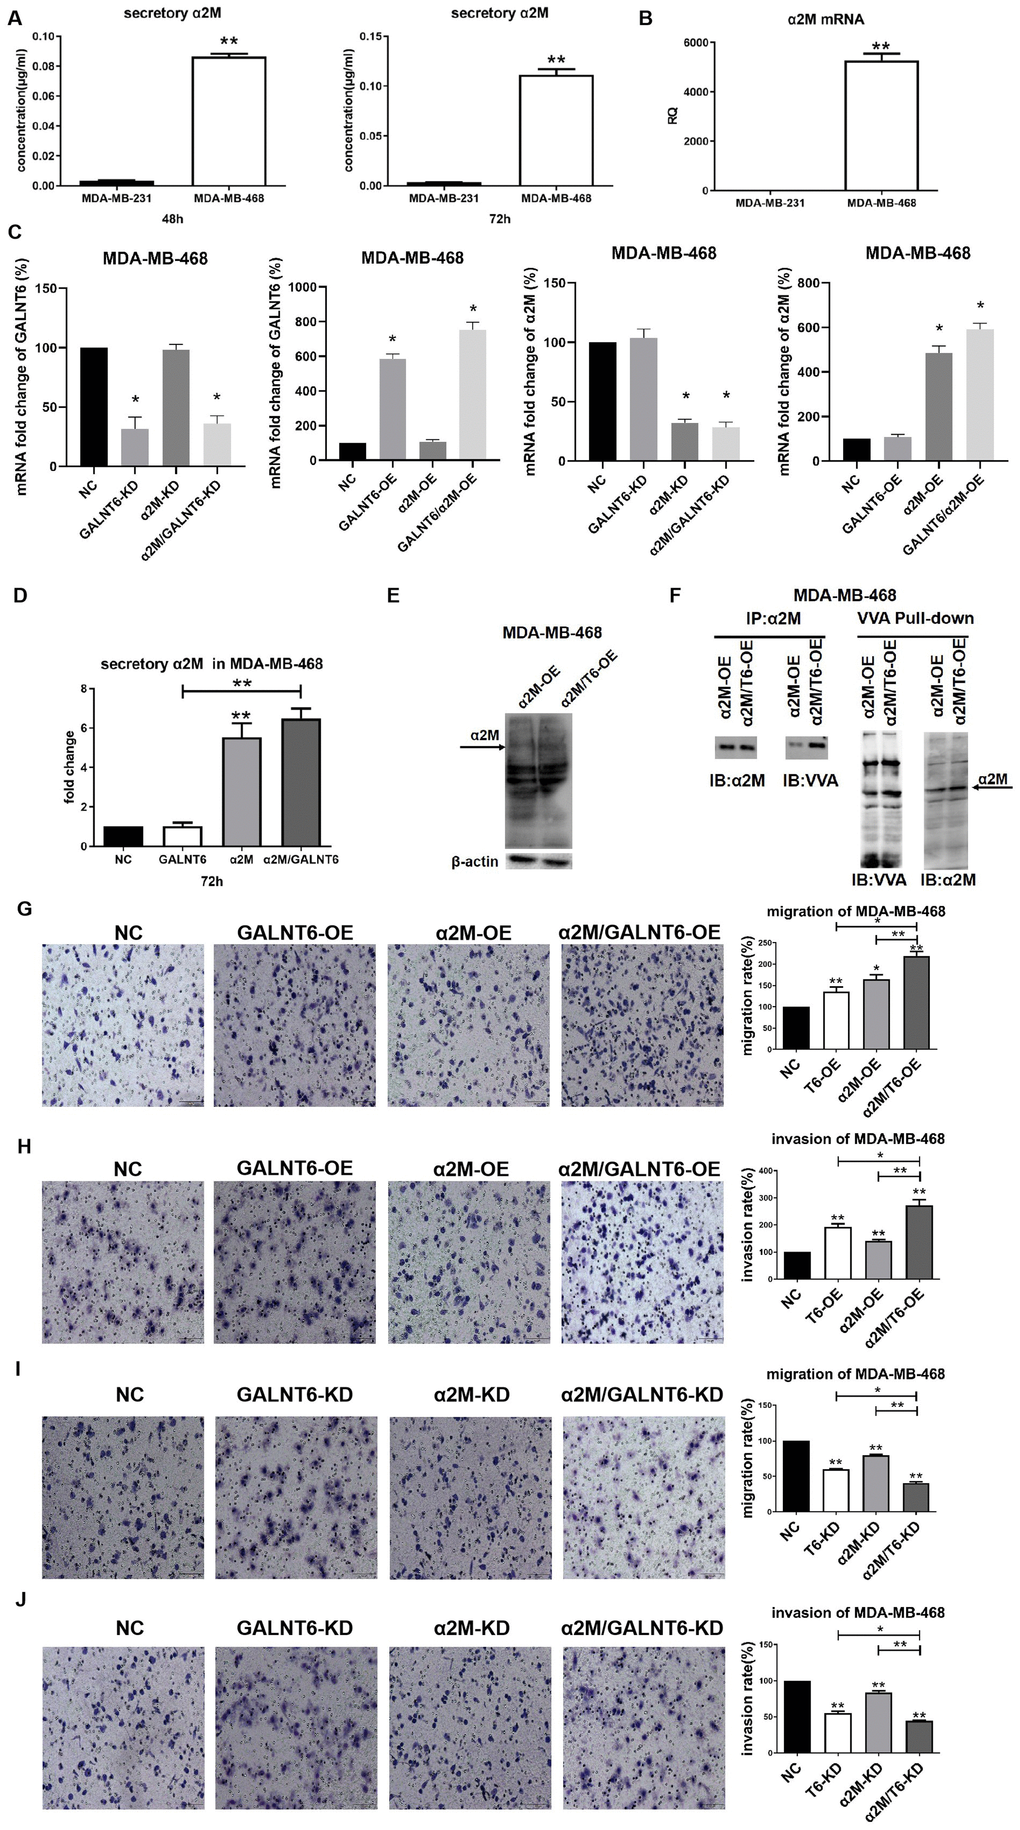 Effect of mucin-type glycosylation of α2M on migration and invasion in breast cancer cells. (A) The secretory level of α2M in MDA-MB-231 and MDA-MB-468 cells. (B) The mRNA level of α2M in MDA-MB-231 and MDA-MB-468 cells. (C) The mRNA level of α2M in MDA-MB-468/NC, MDA-MB-468/OE-GALNT6, MDA-MB-468/OE-α2M, MDA-MB-468/OE-GALNT6/α2M. (D) The secretory level of α2M in α2M and GALNT6 OE MDA-MB-468 cells. (E) The levels of O-GalNAcylation in α2M OE and α2M/GALNT6 OE MDA-MB-468 cells were verified by Western blotting using anti-O-GalNAc antibody. The arrow indicates GalNAc-conjugated α2M. β-actin was used as internal control. (F) Mucin-type O-glycosylation of α2M was detected by VVA lectin pull-down assay in MDA-MB-468/OE-α2M and MDA-MB-468/OE-GALNT6/α2M cells. (G–J) Migratory and invasive abilities of MDA-MB-468 cells were compared between knockdown or overexpression of GALNT6 and α2M and corresponding negative control. T6, GALNT6.